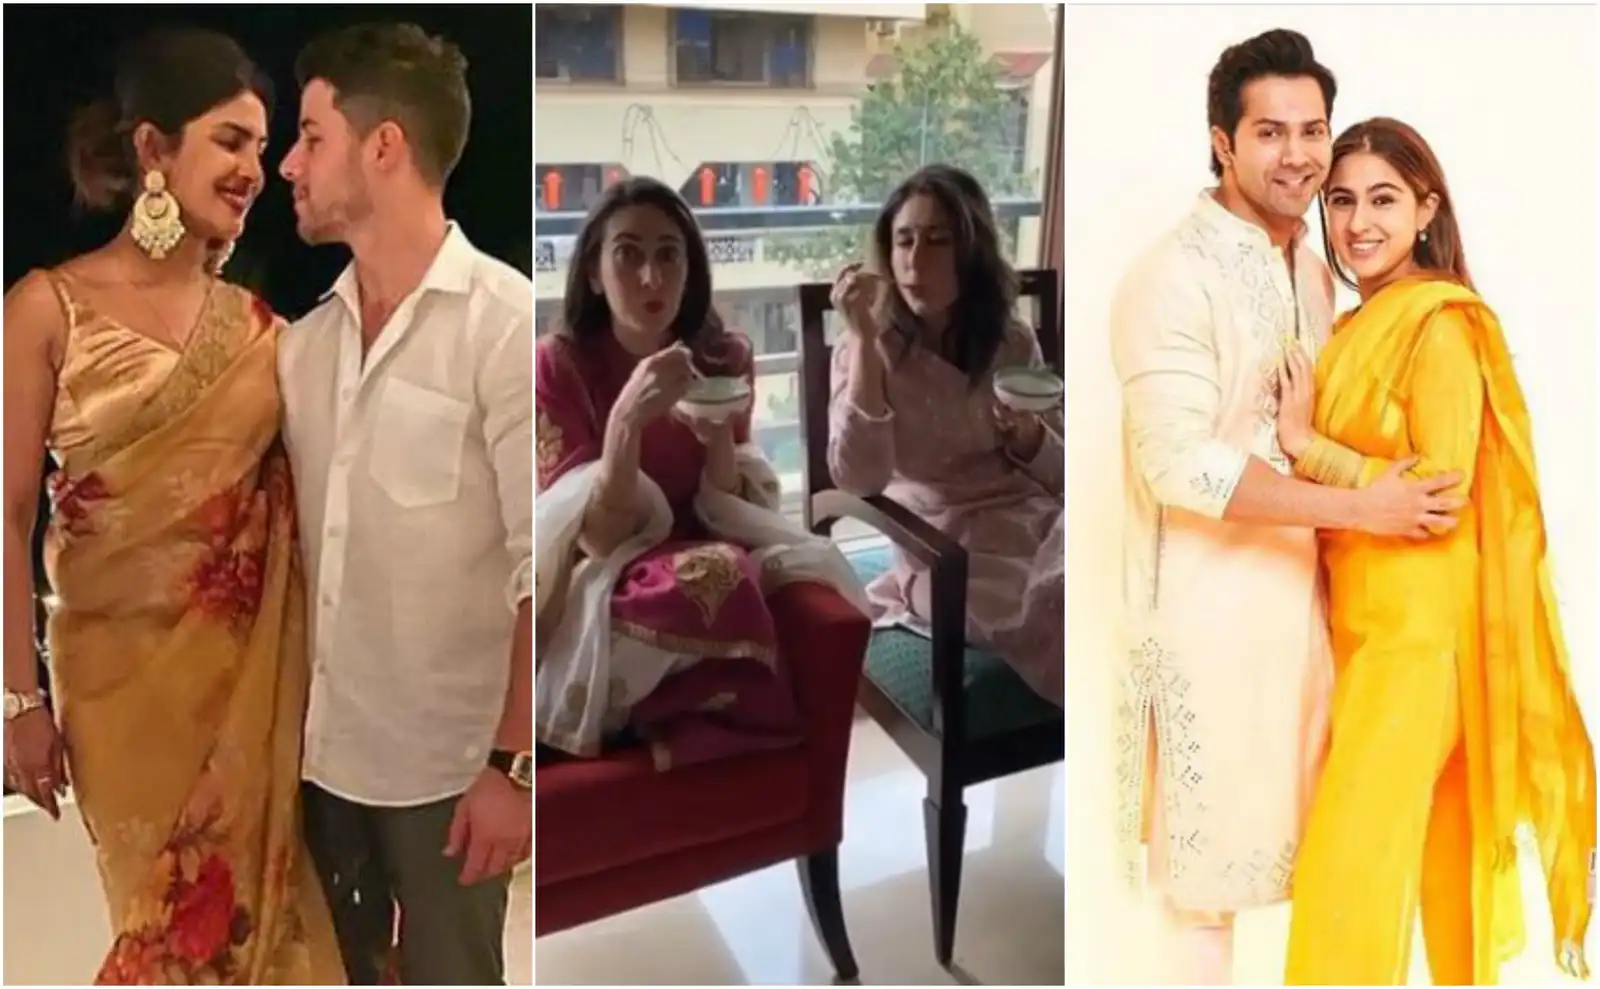 Diwali 2019: Here's How Our Beloved Bollywood Celebs Wished Their Fans On The Joyous Occassion